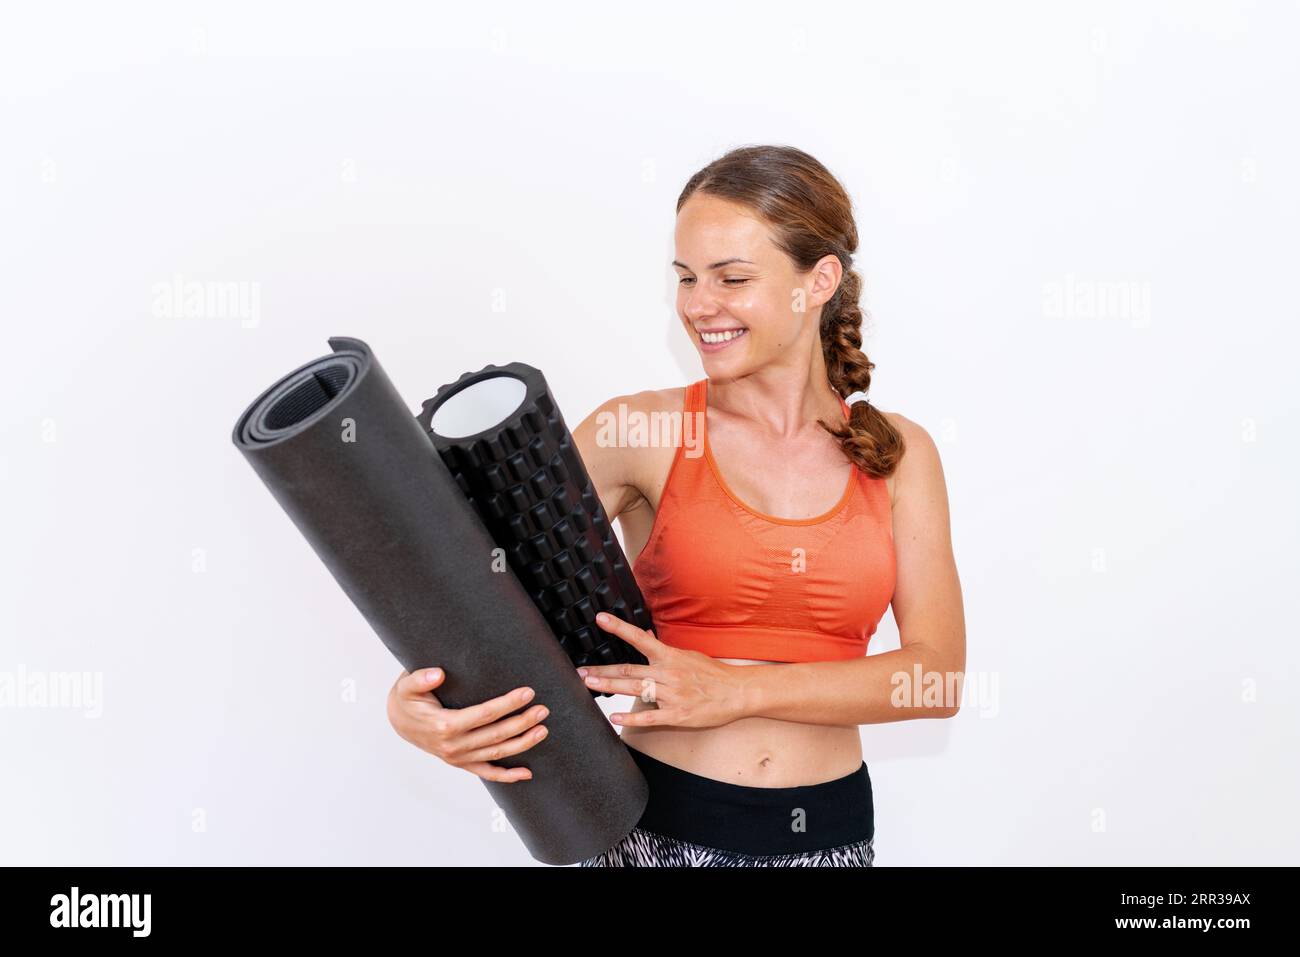 studio shot female athlete holding exercise equipment foam roller rolled yoga mat and smiling, wearing sportswear, in front of white background. Stock Photo